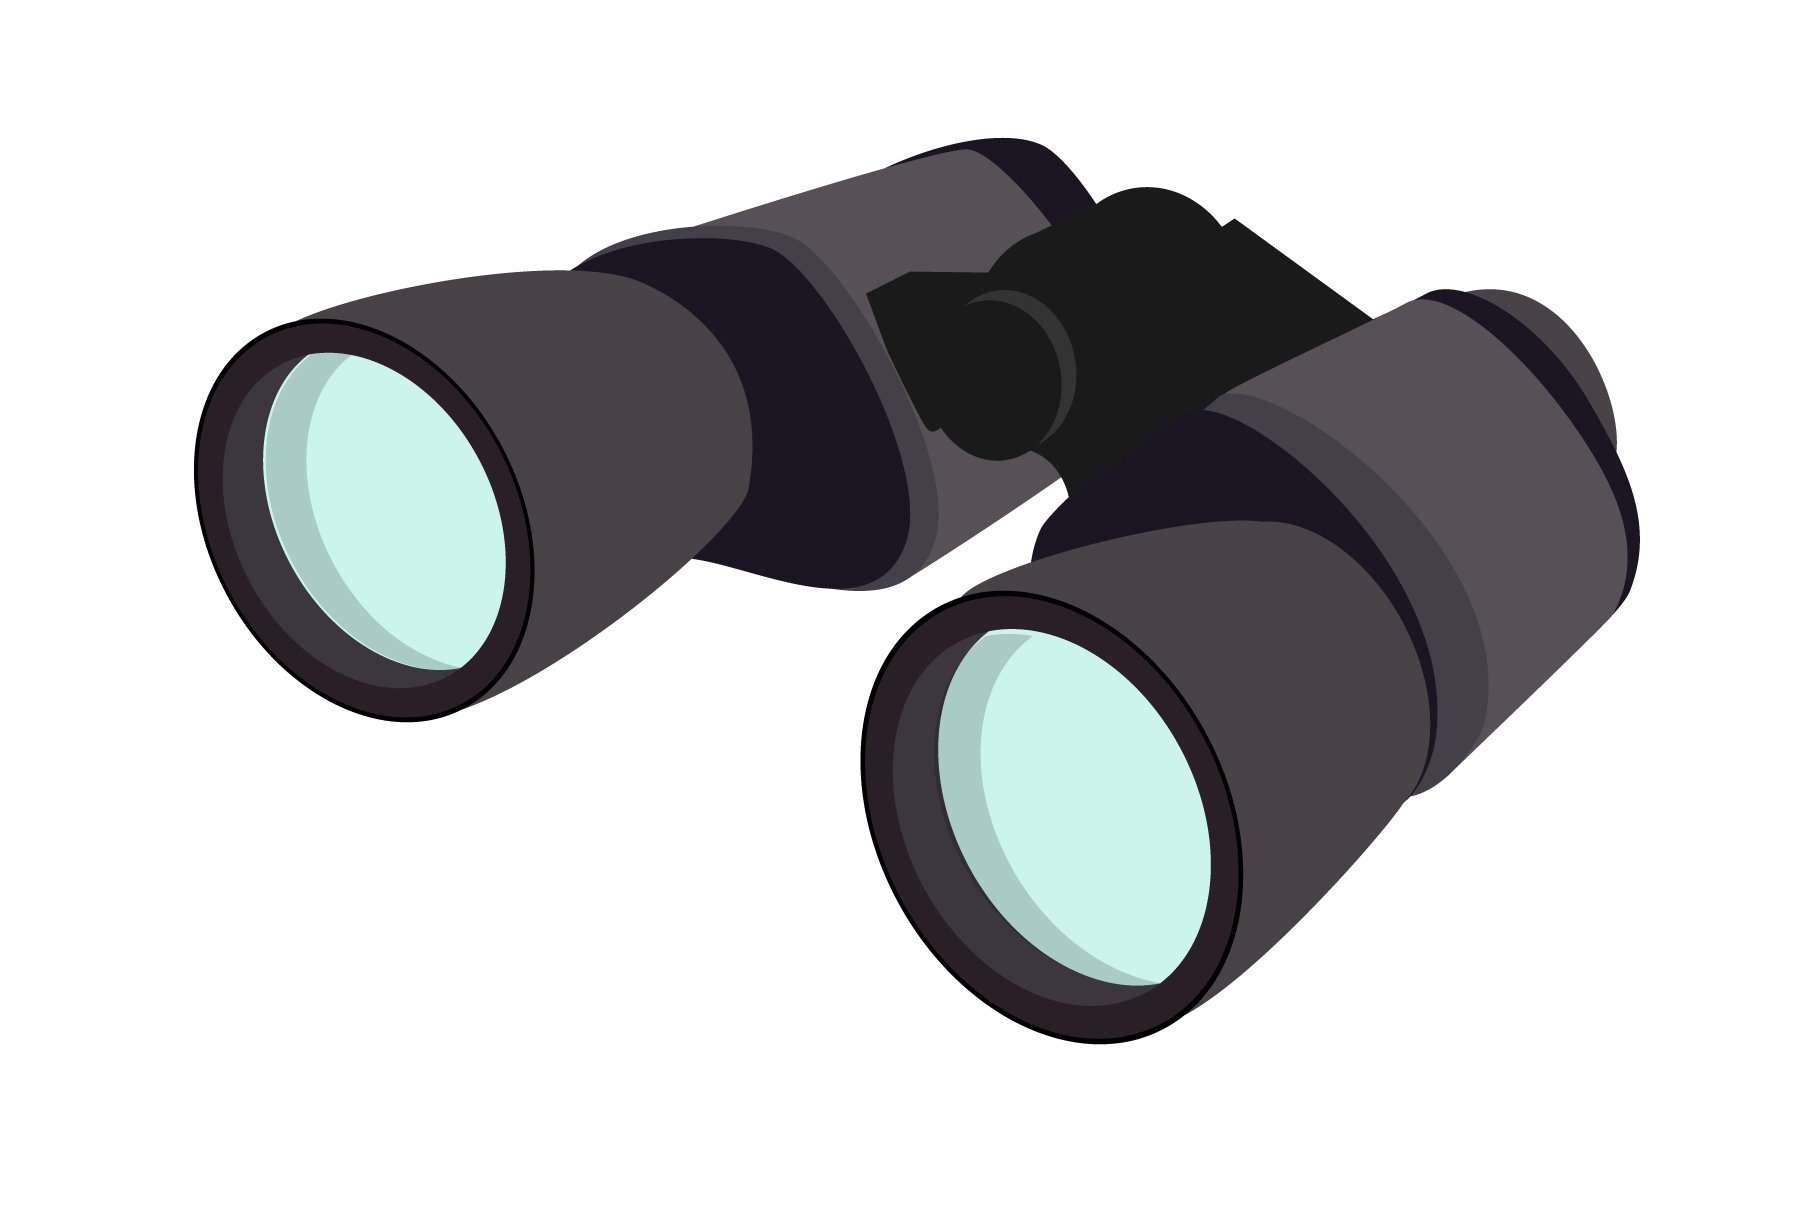 Discovery binoculars cover image.